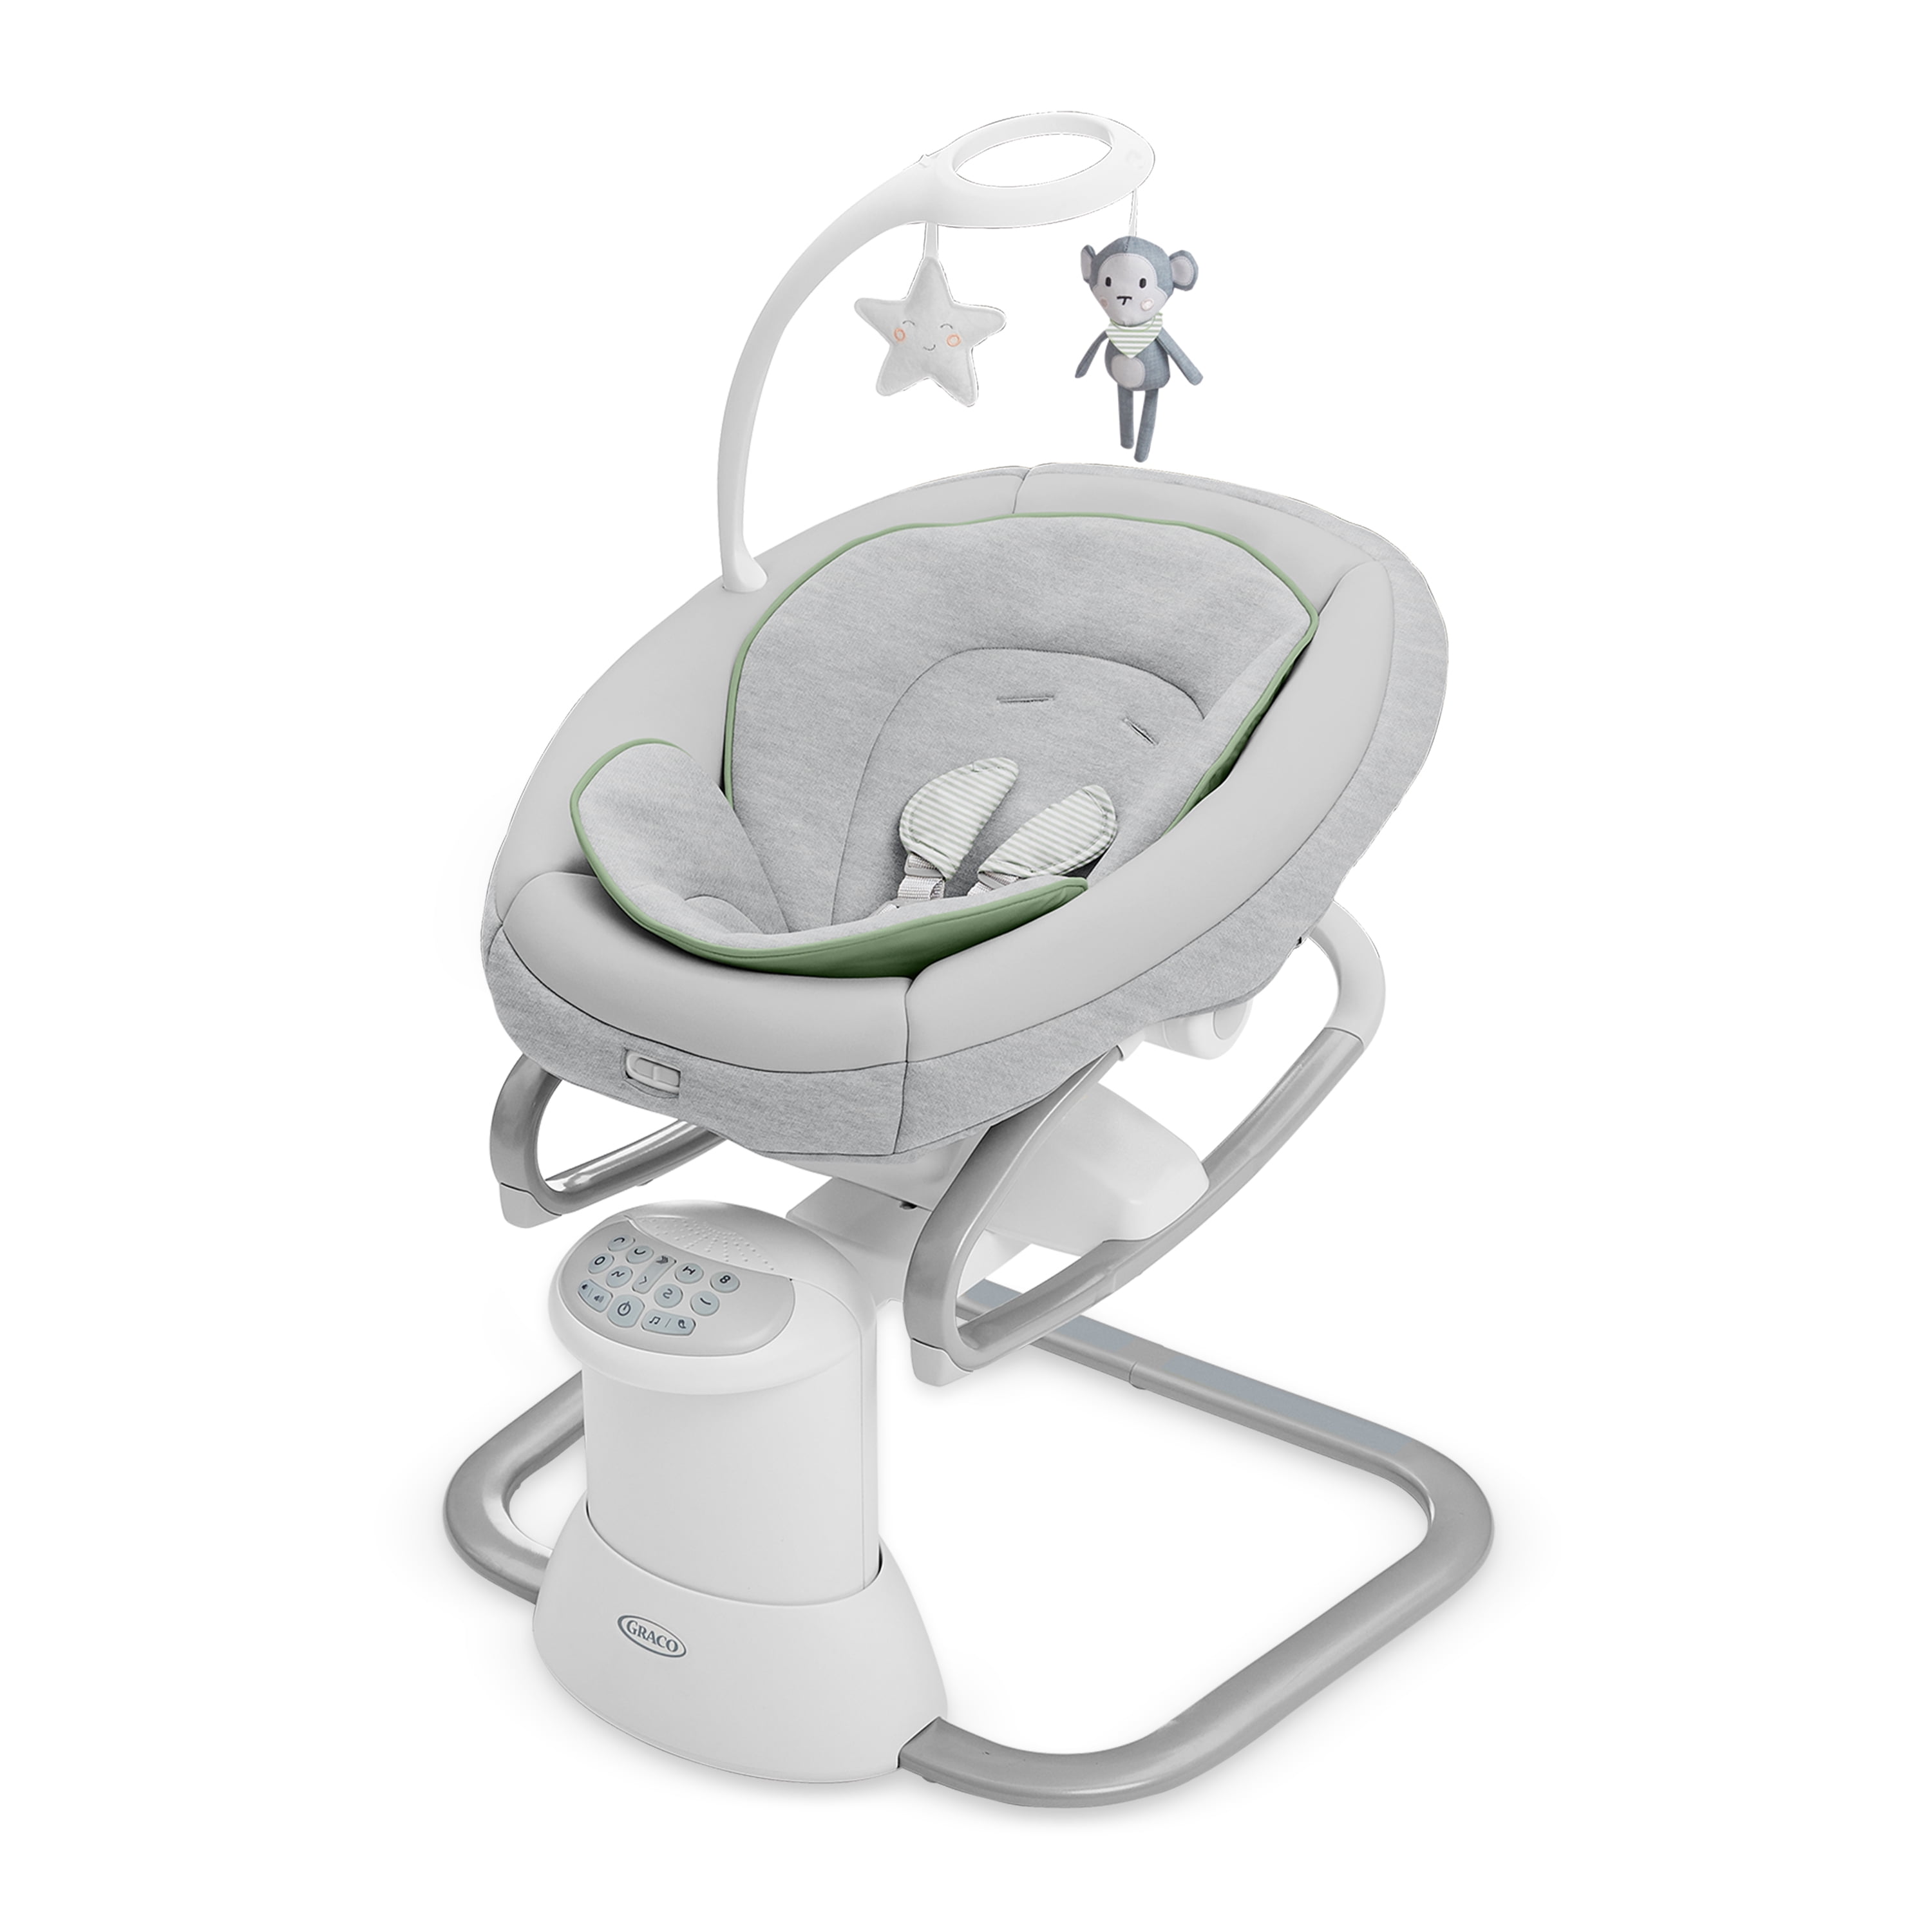 Jonerytime_Outdoor&Sport Baby Swing【Shipped from US Warehouse】 Jonerytime_Electric Portable Baby Swing Cradle for Infants Rocker Swing Chair with Music 